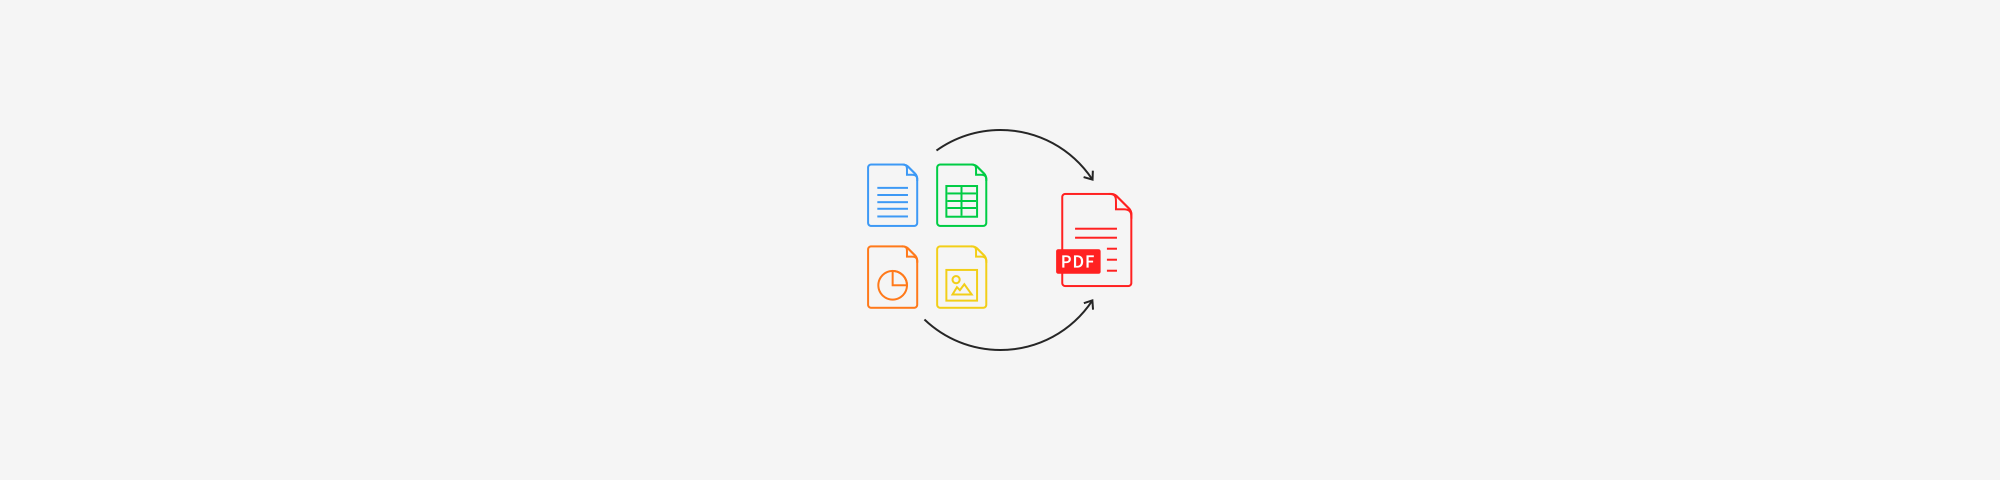 Create pdf from images